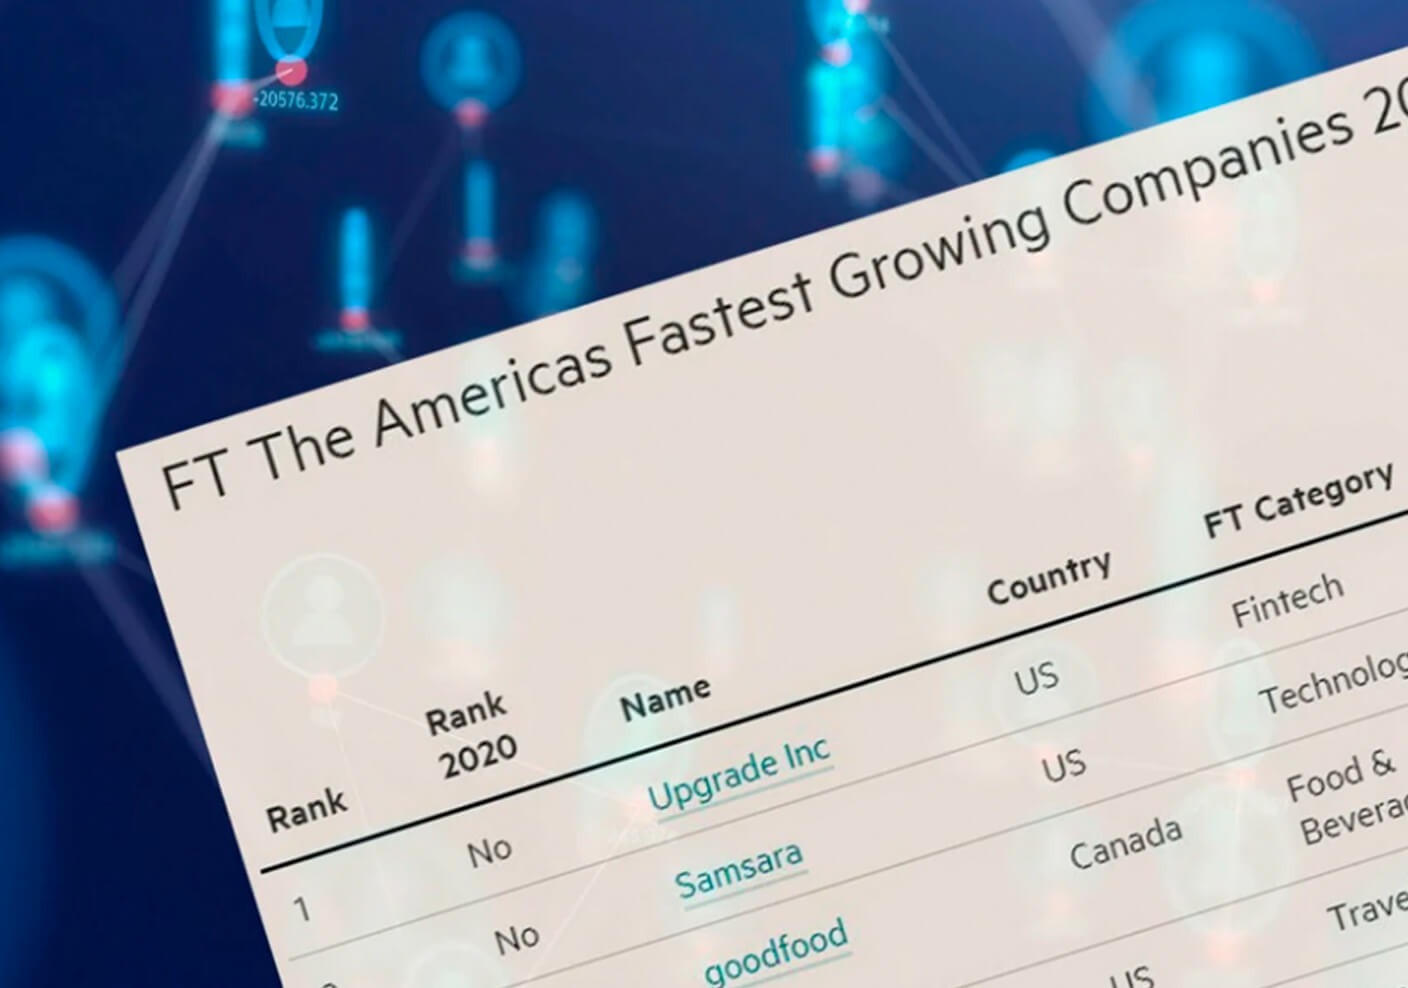 Mursion Named One of the Fastest Growing Companies in the Americas by the Financial Times